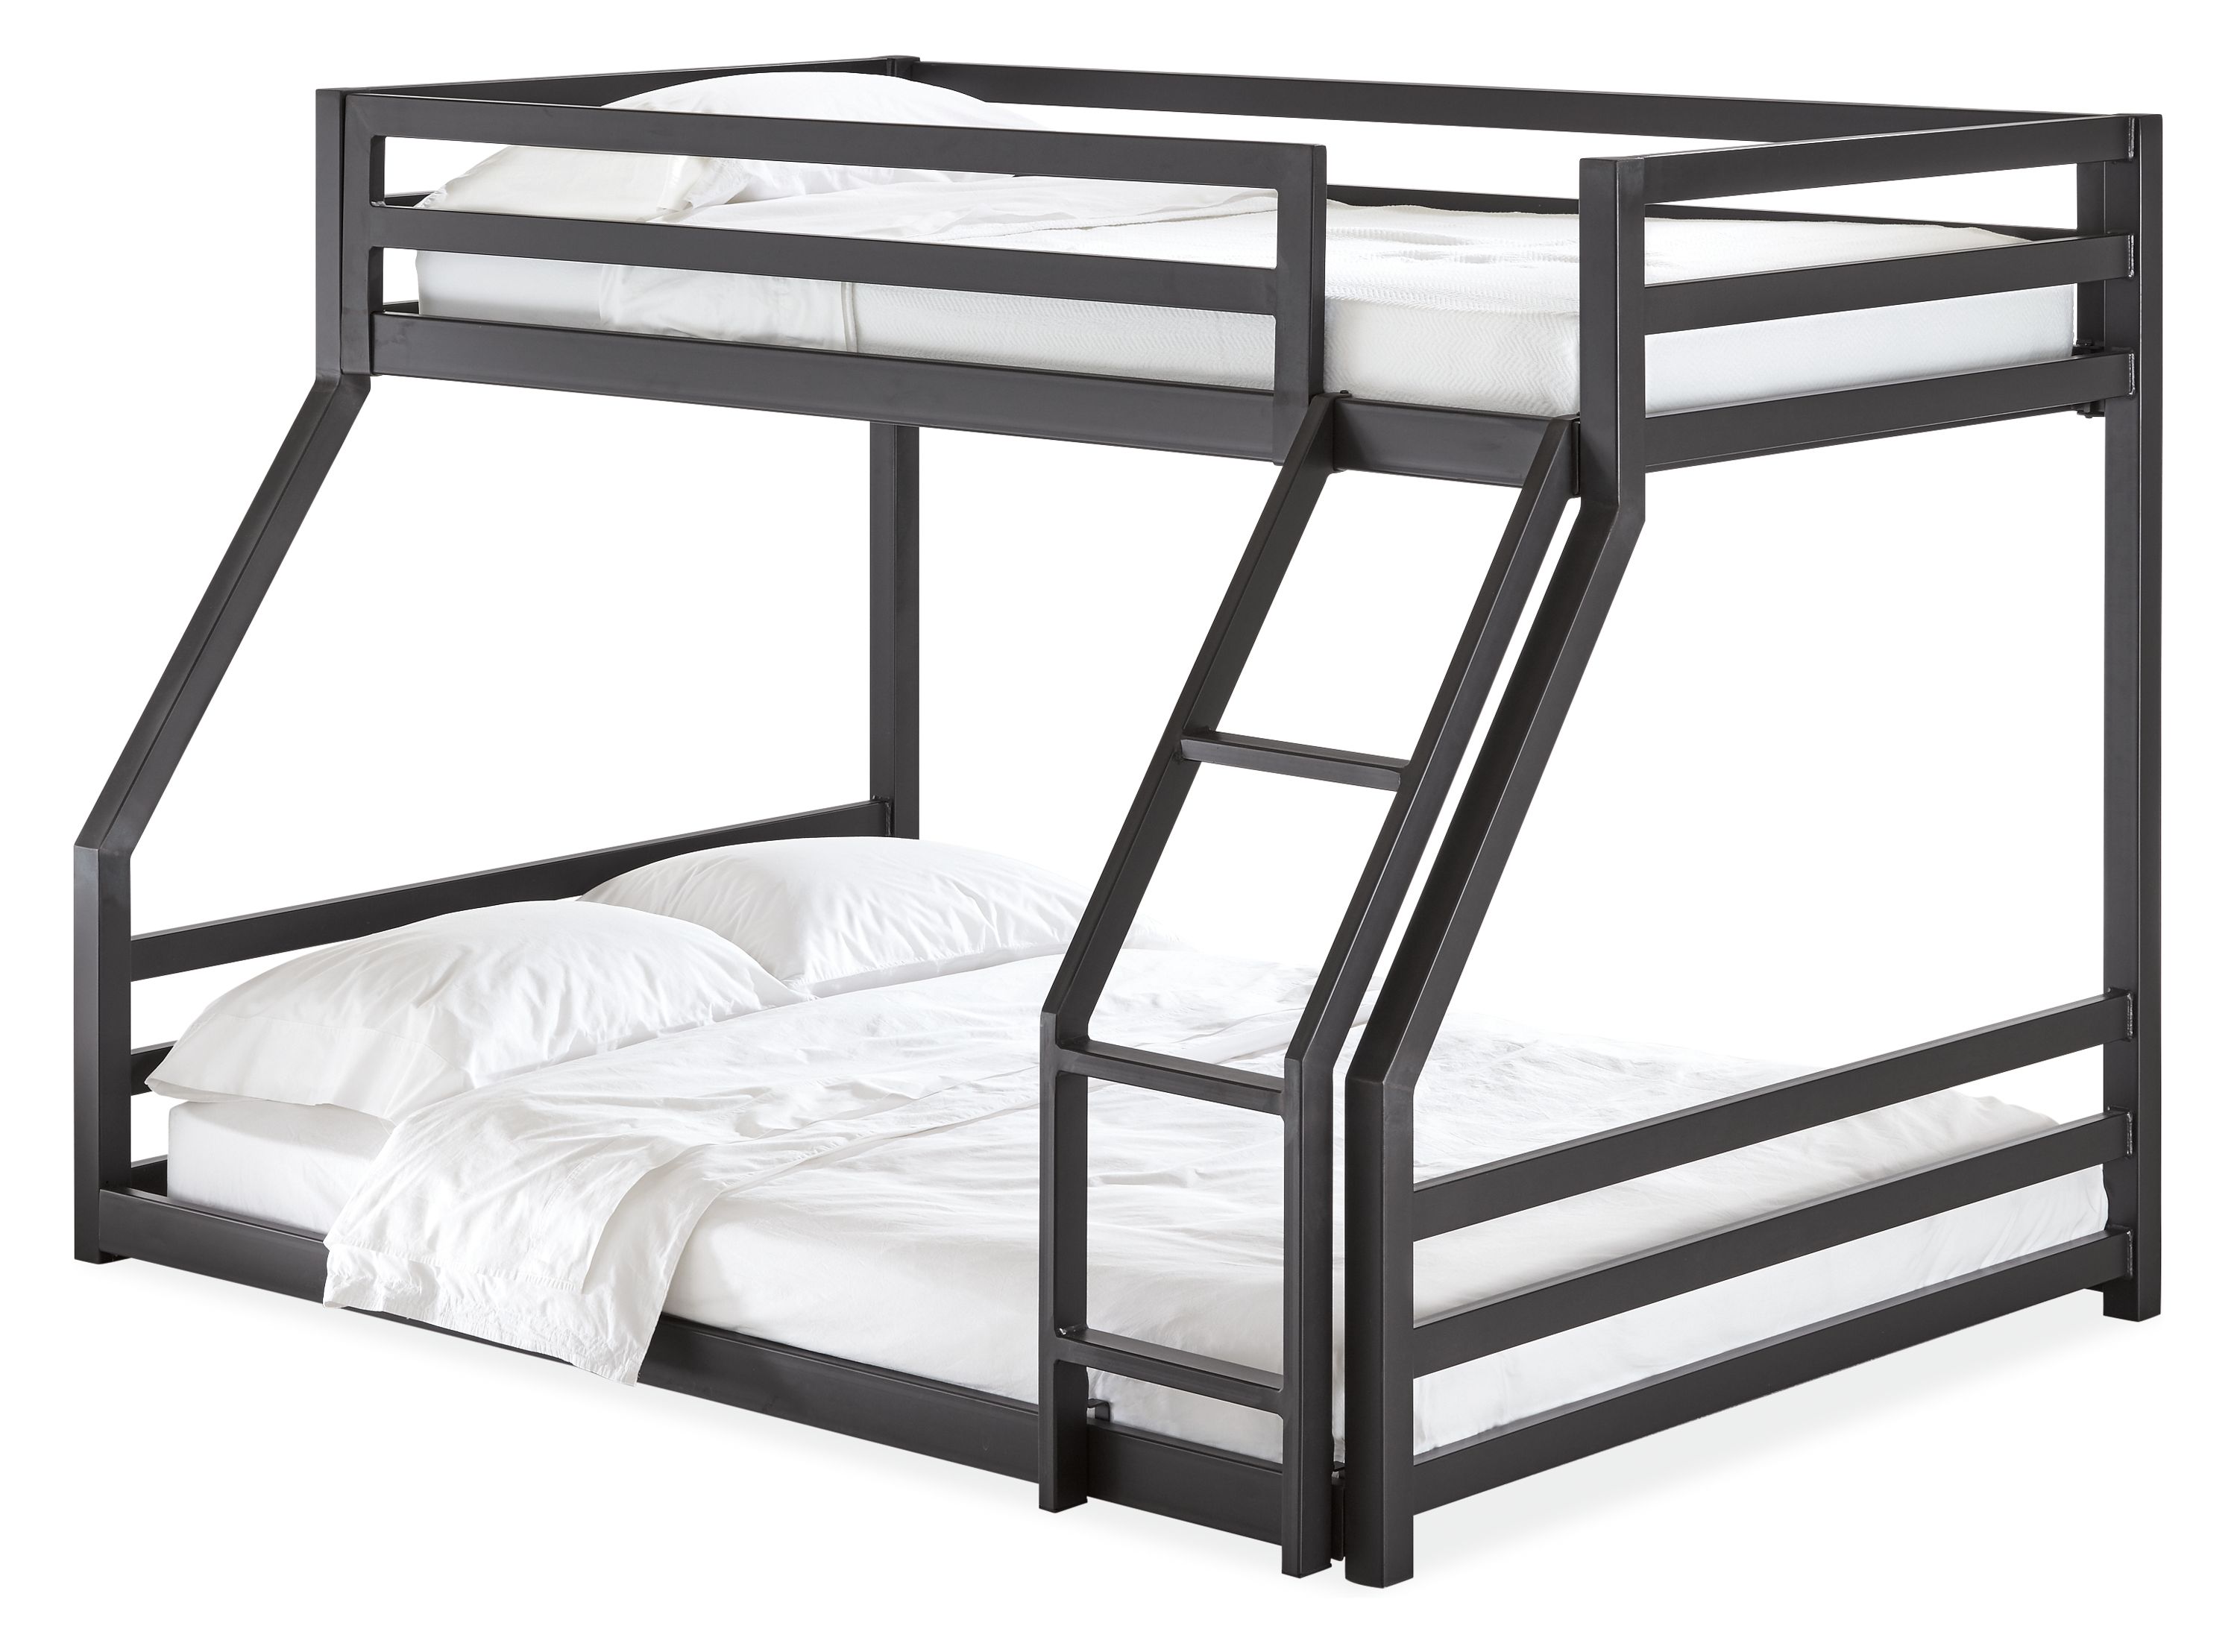 Fort Bunk Beds Modern Kids Furniture, Bunk Beds Monthly Payments